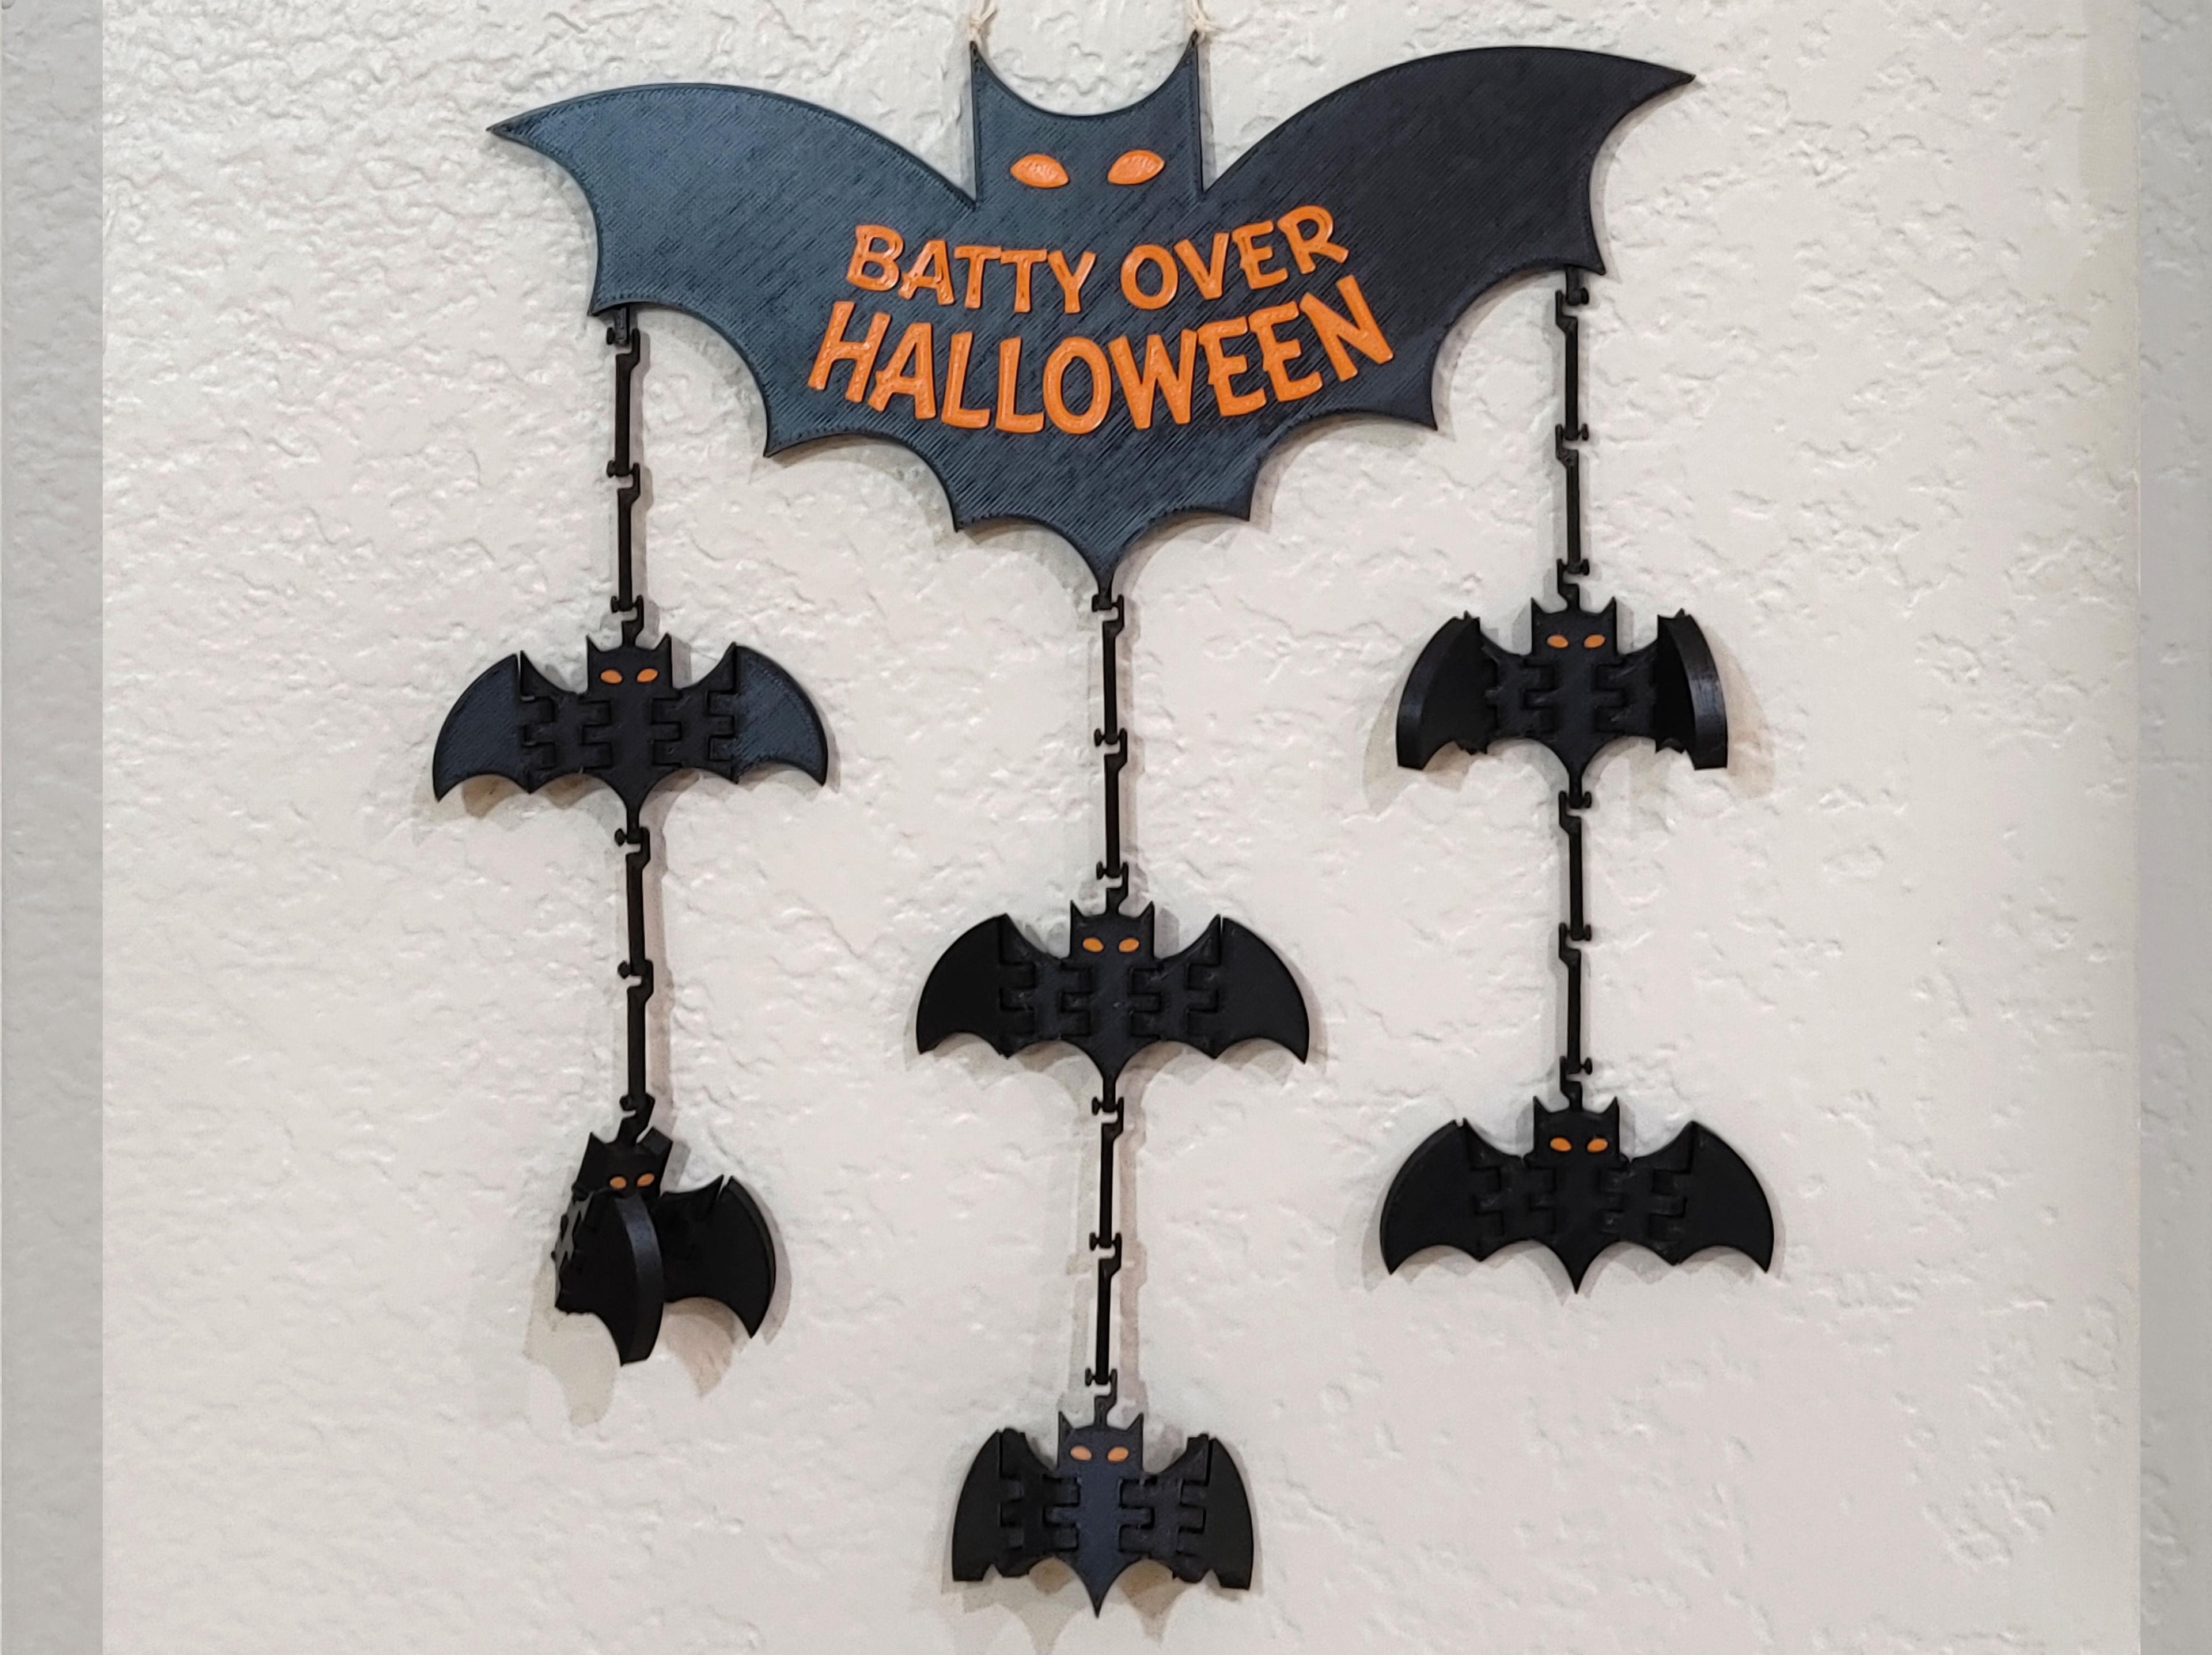 Batty Over Halloween Print in Place Hanging Bat Decoration 3d model